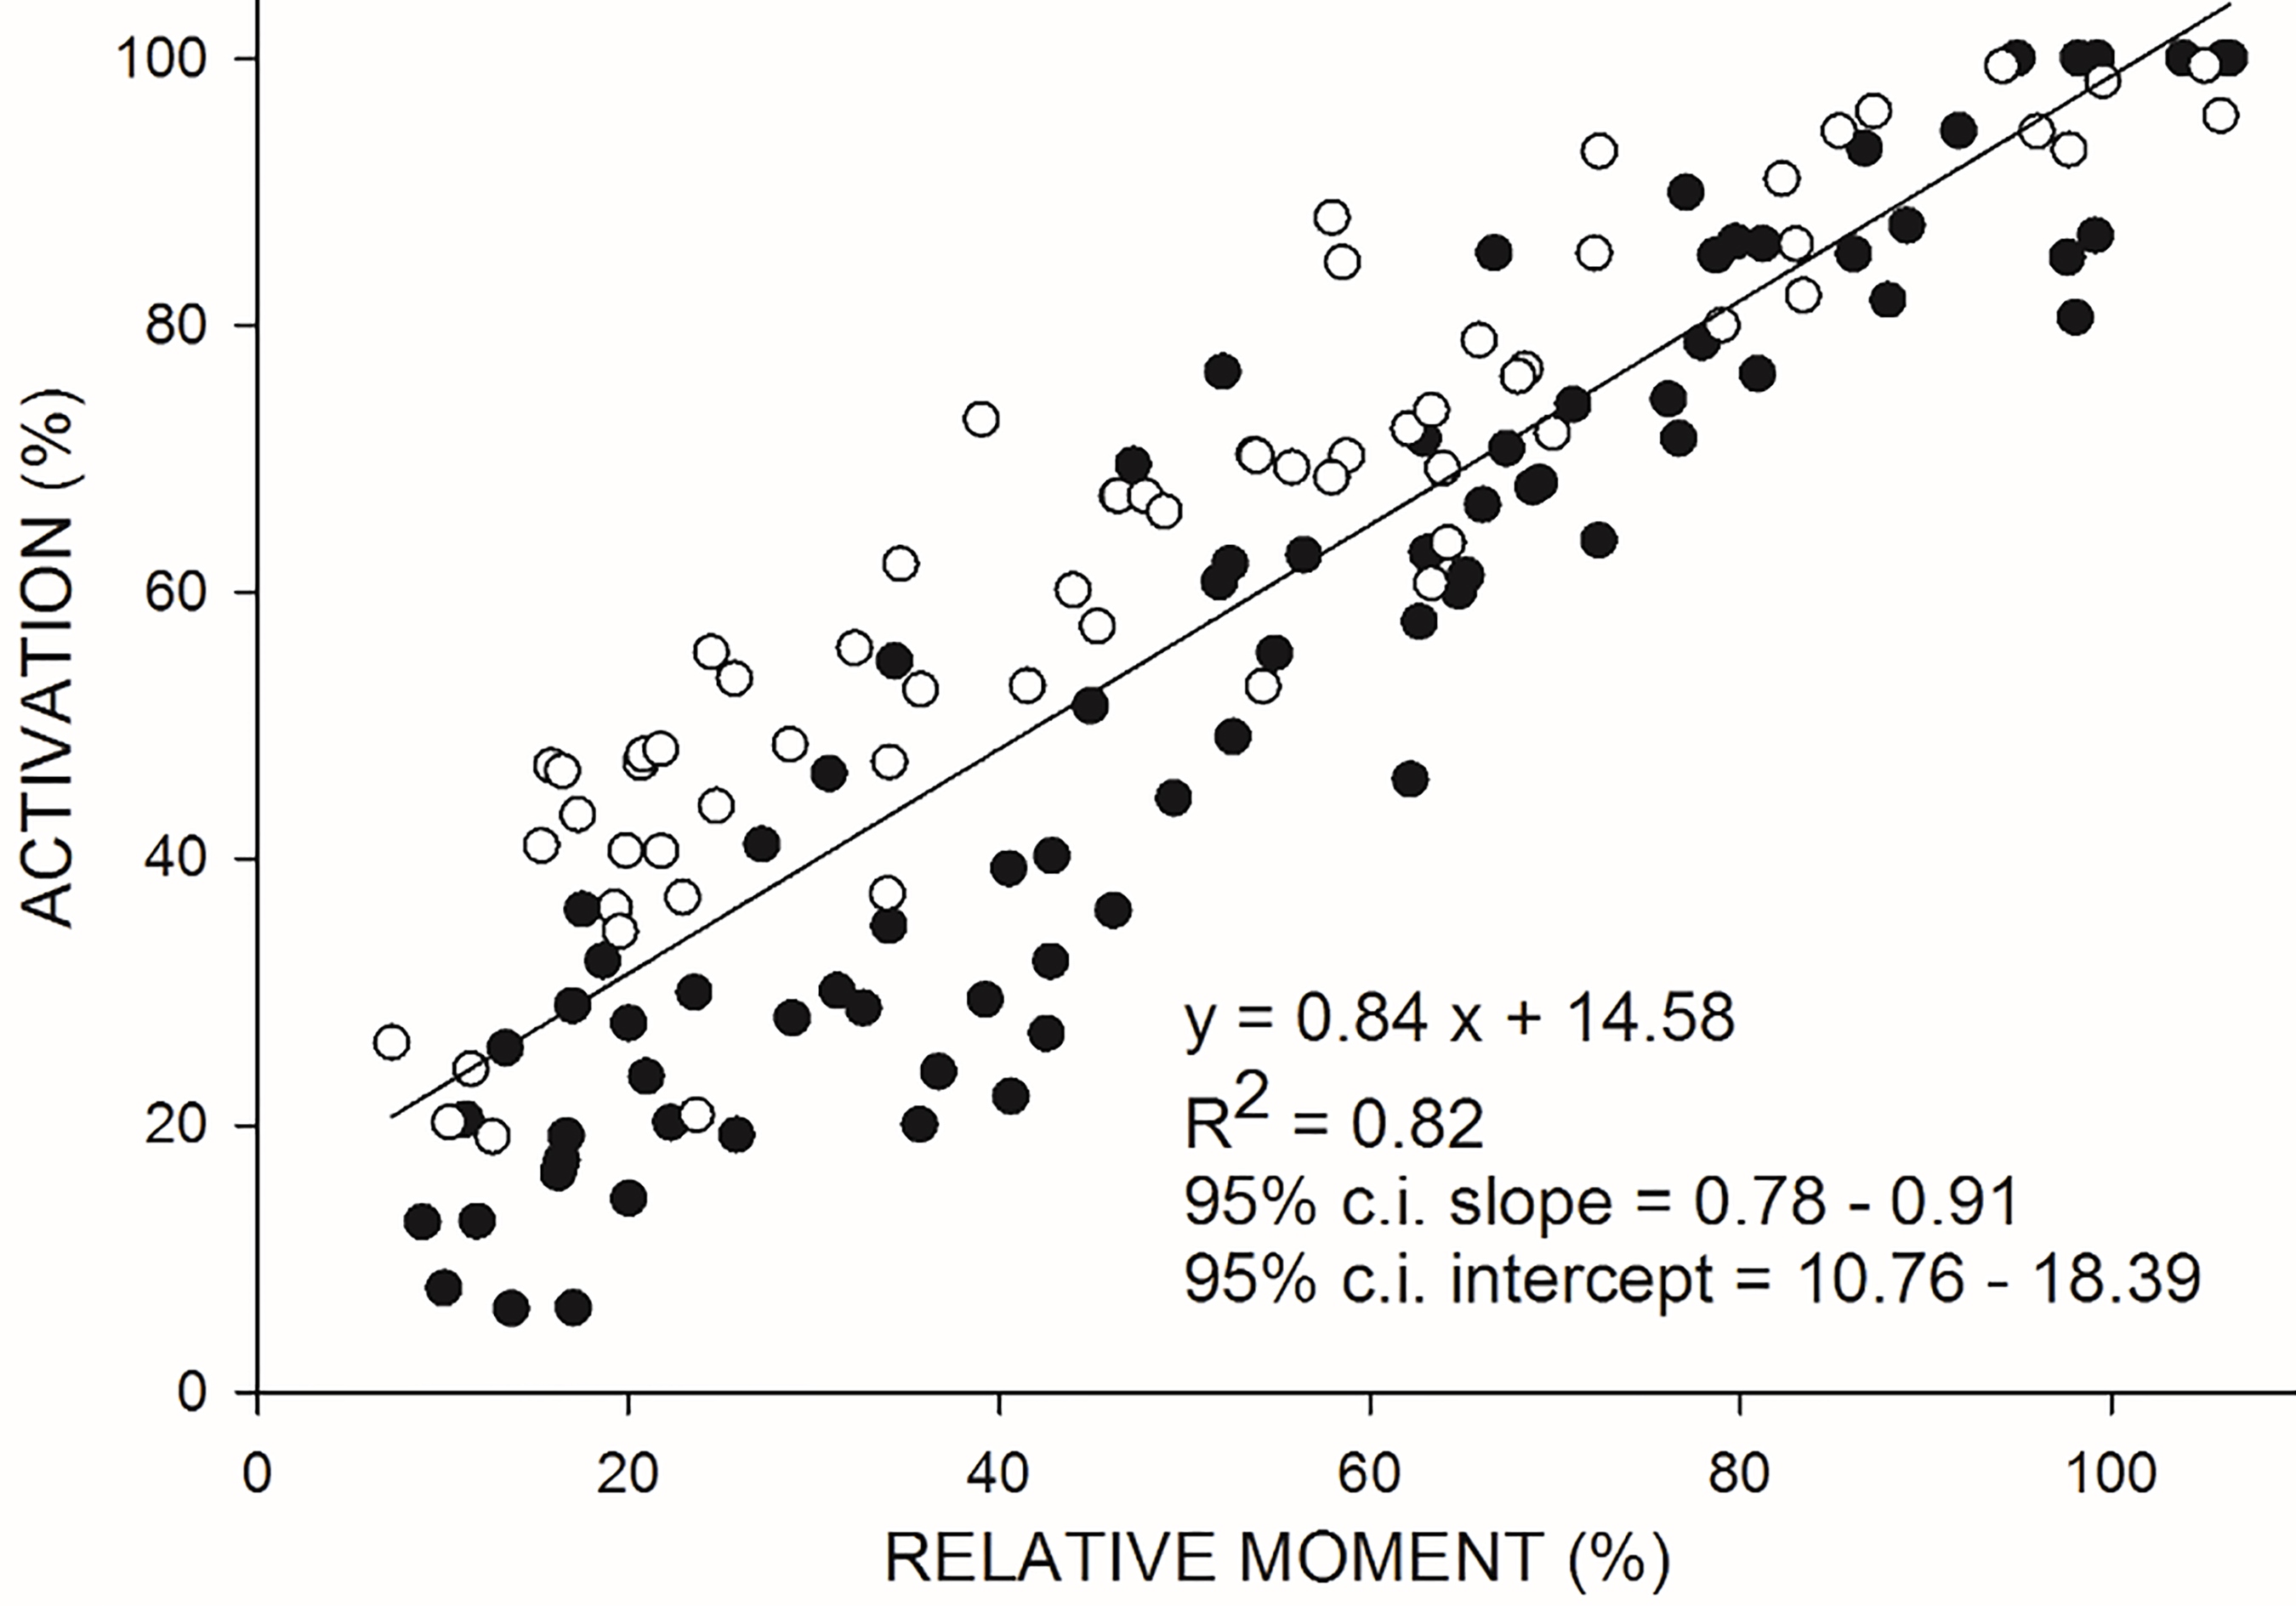 Relationship between VA (on the ordinate) and relative moment (on the abscissa) during isokinetic concentric (CON120) contractions at 120∘/s. Moment values were standardized with respect to the individual estimated maximal moment. White and black dots refer to each of the three trials performed by 5 women and 5 men, respectively. Data were best fitted by linear regression equation (see parameters given on the top right of the figure).